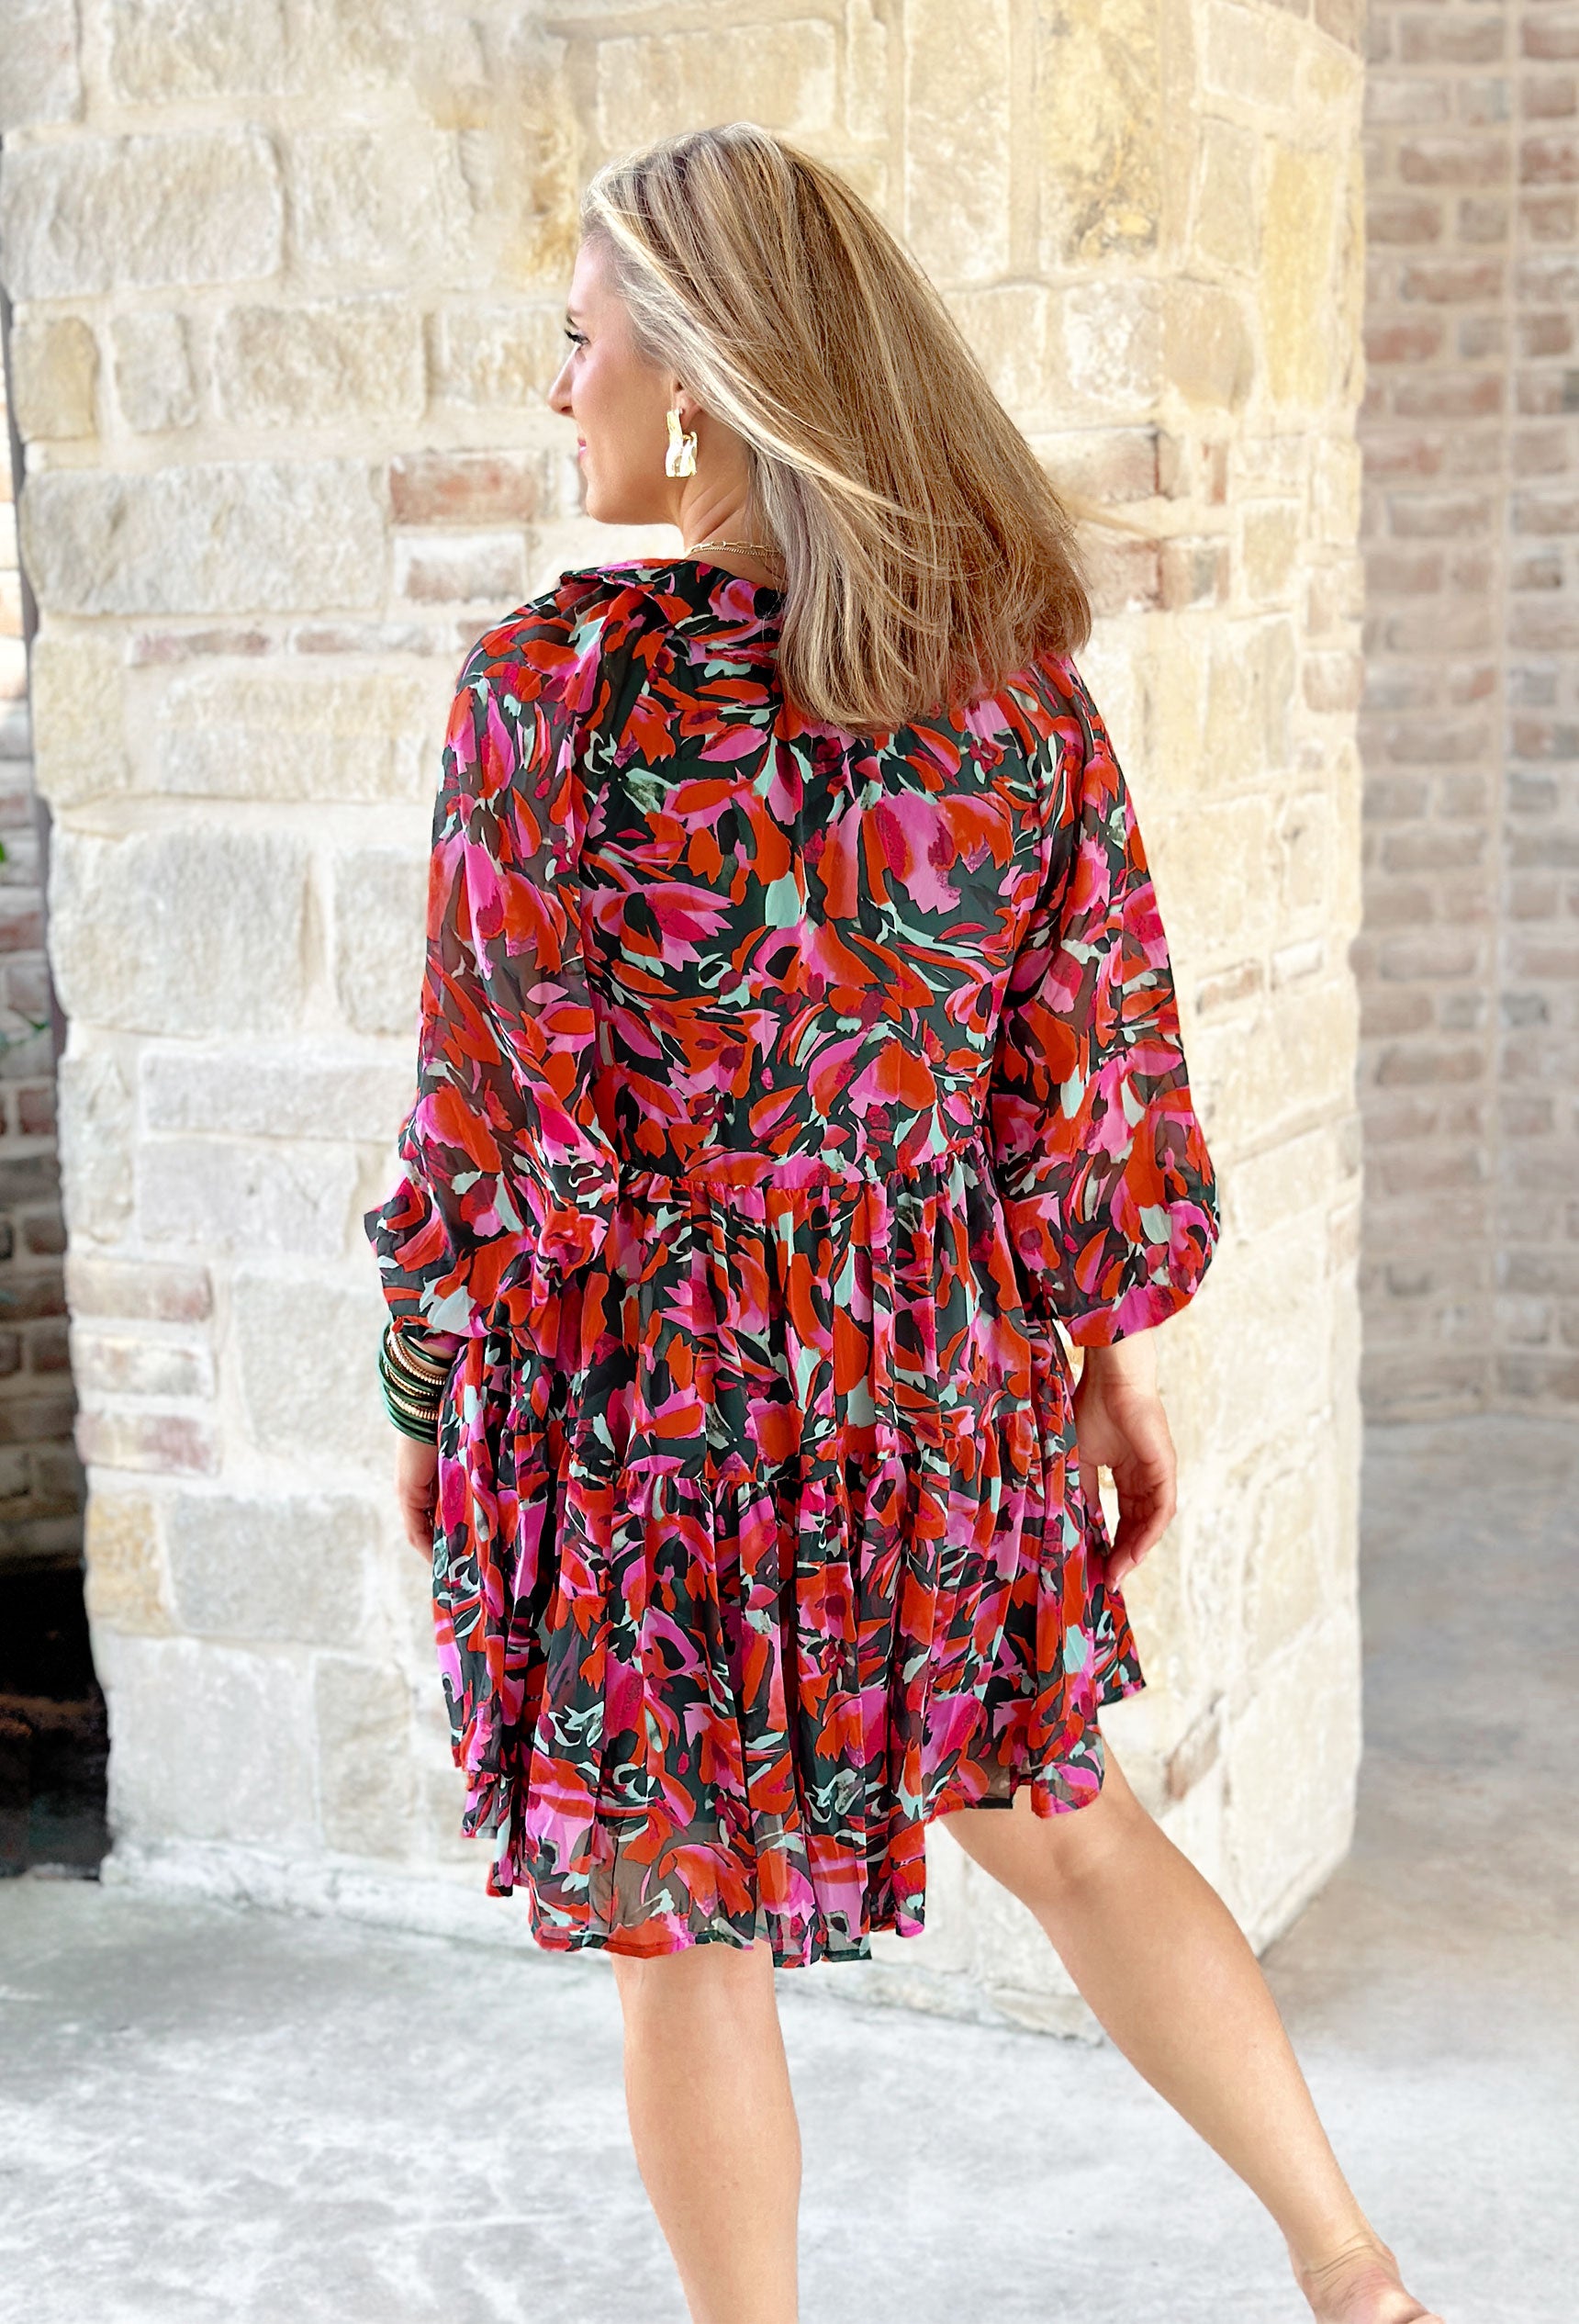 Just Imagine Floral Dress, red, magenta, green and black floral long sleeve dress, sleeves are blousey with cinching at the wrist